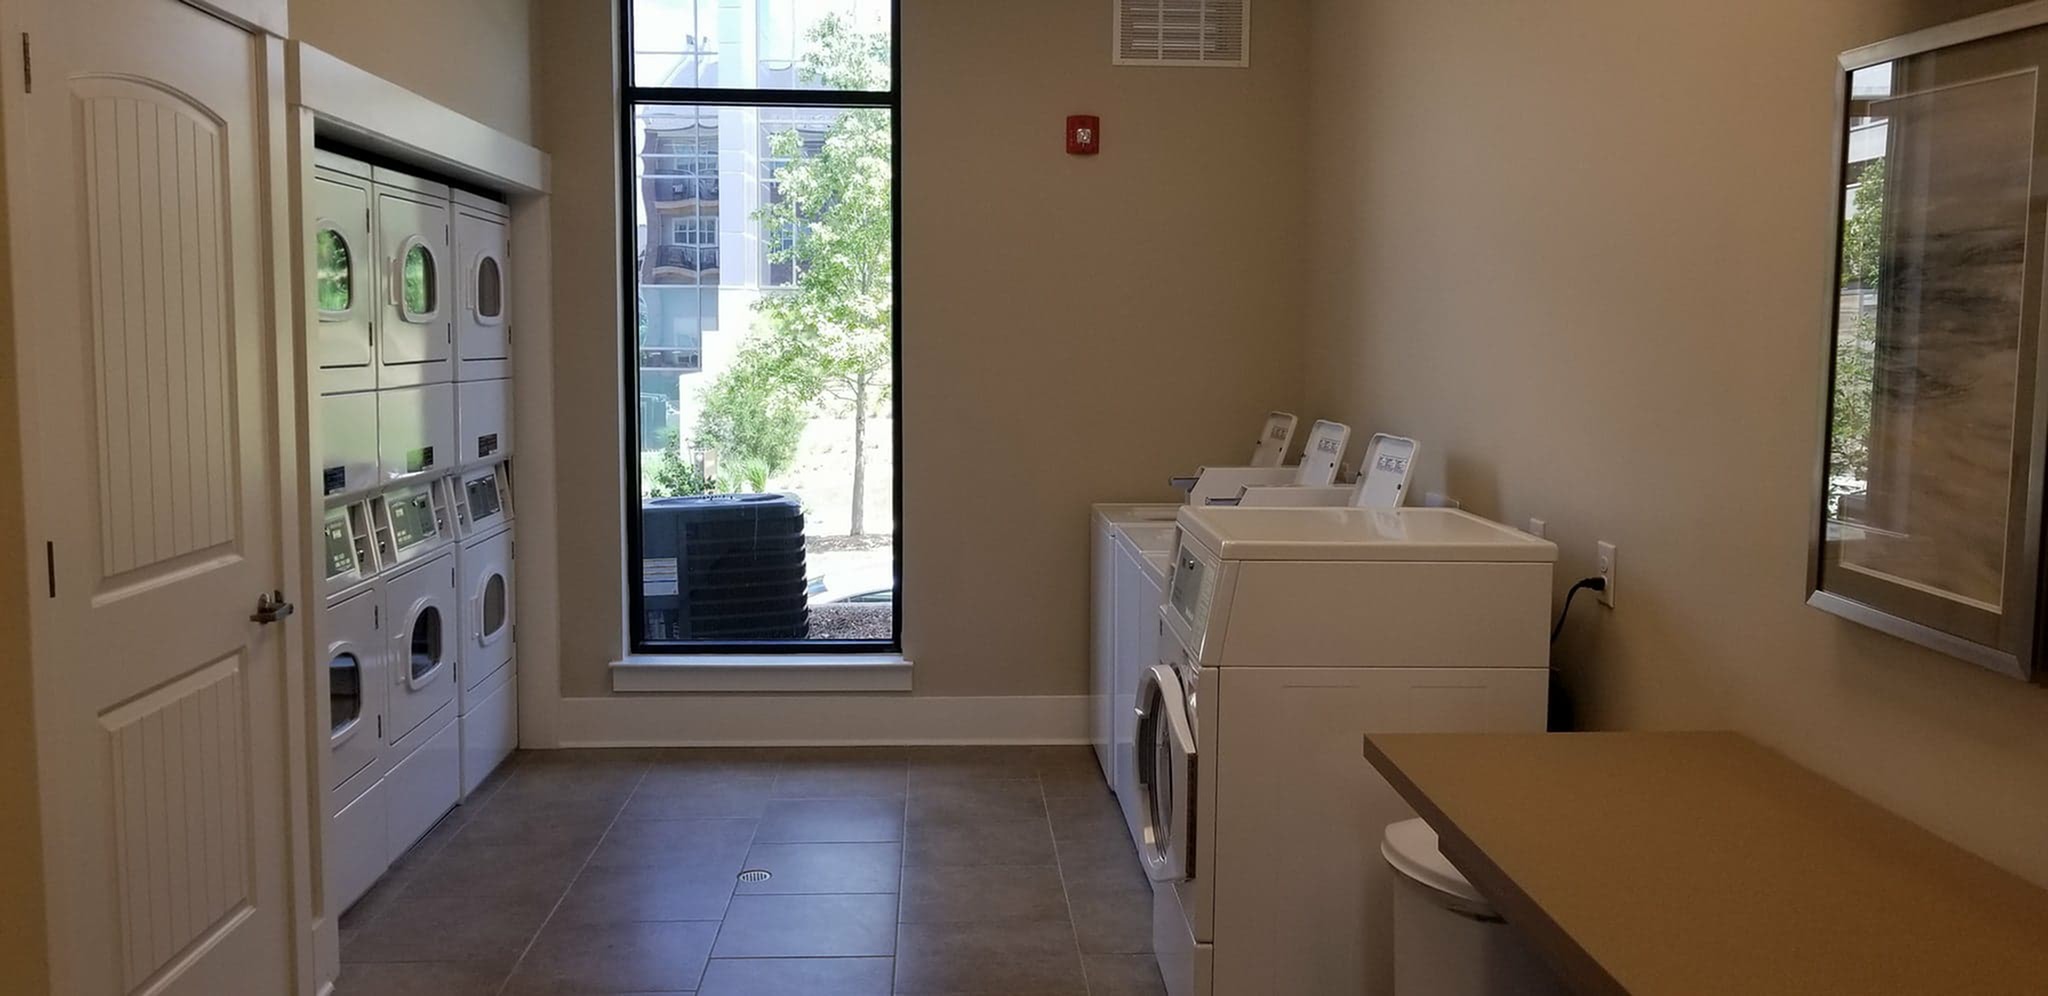 In-home Laundry| Apartments For Rent Fort Mill SC | Kingsley Apartments